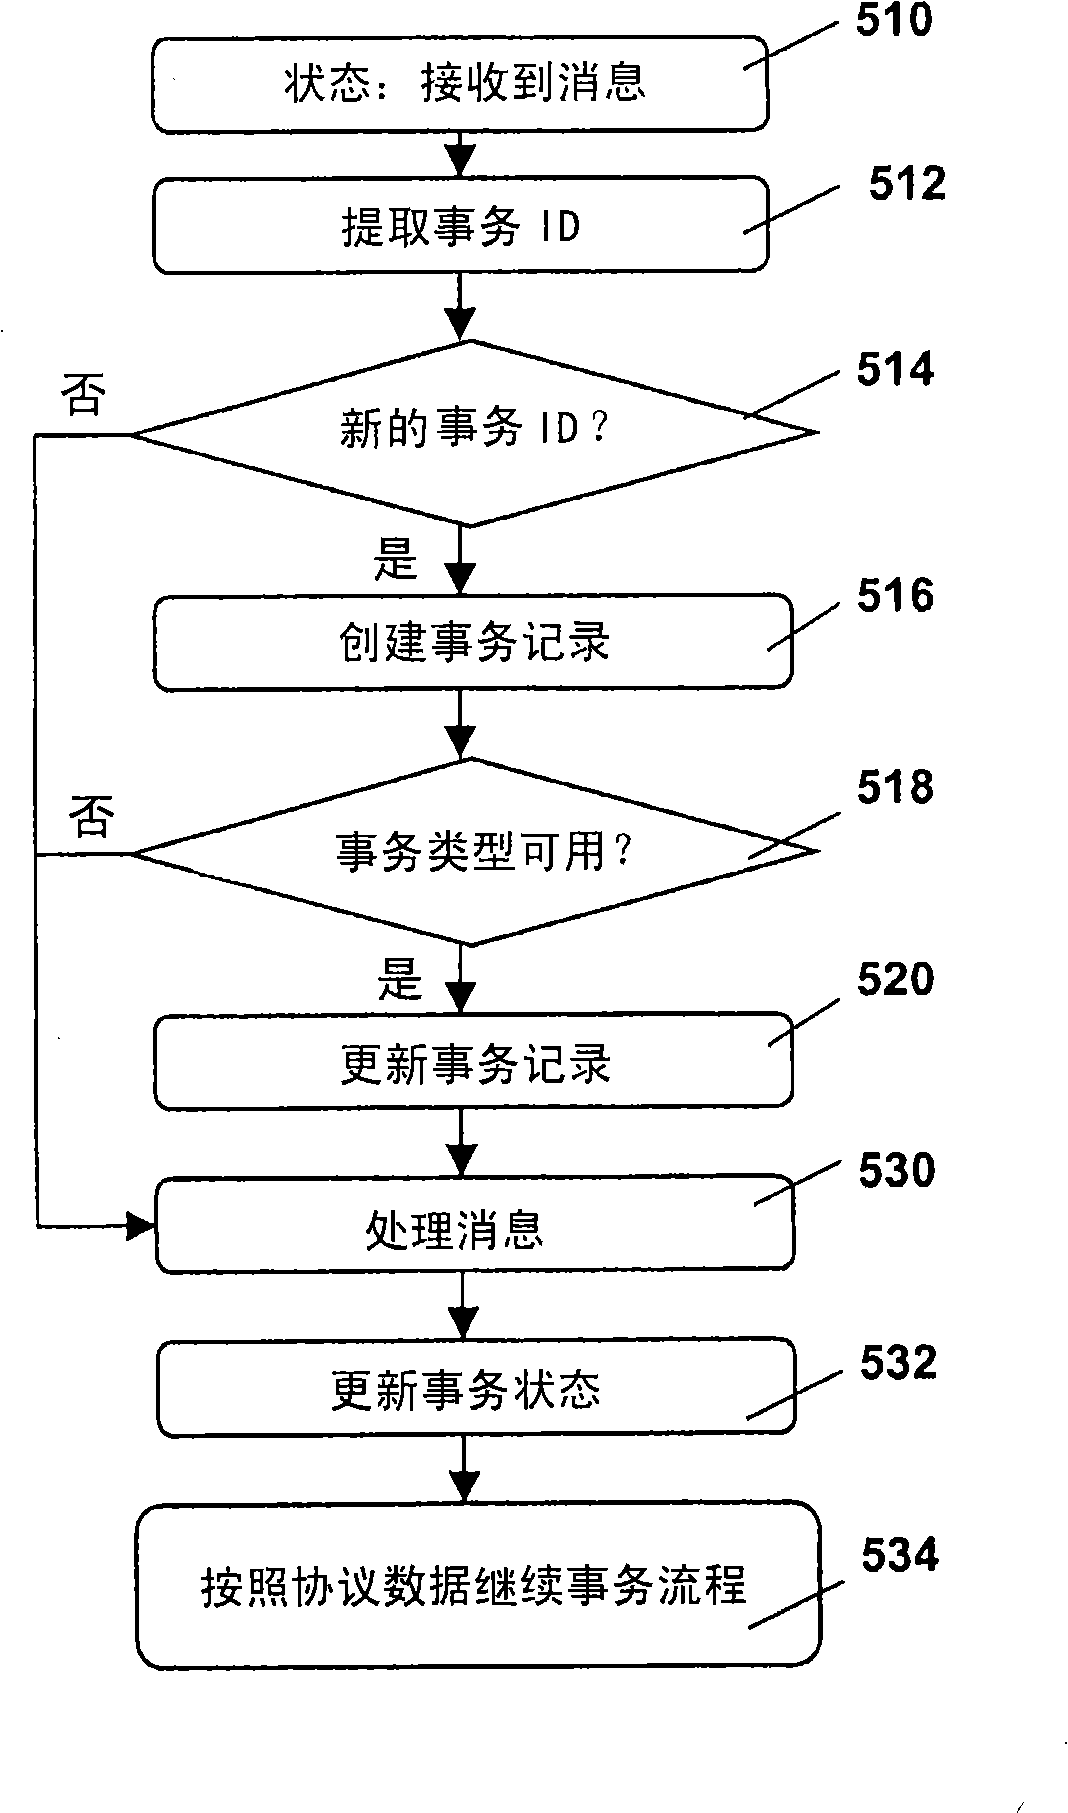 System and method for correlating messages within a wireless transaction